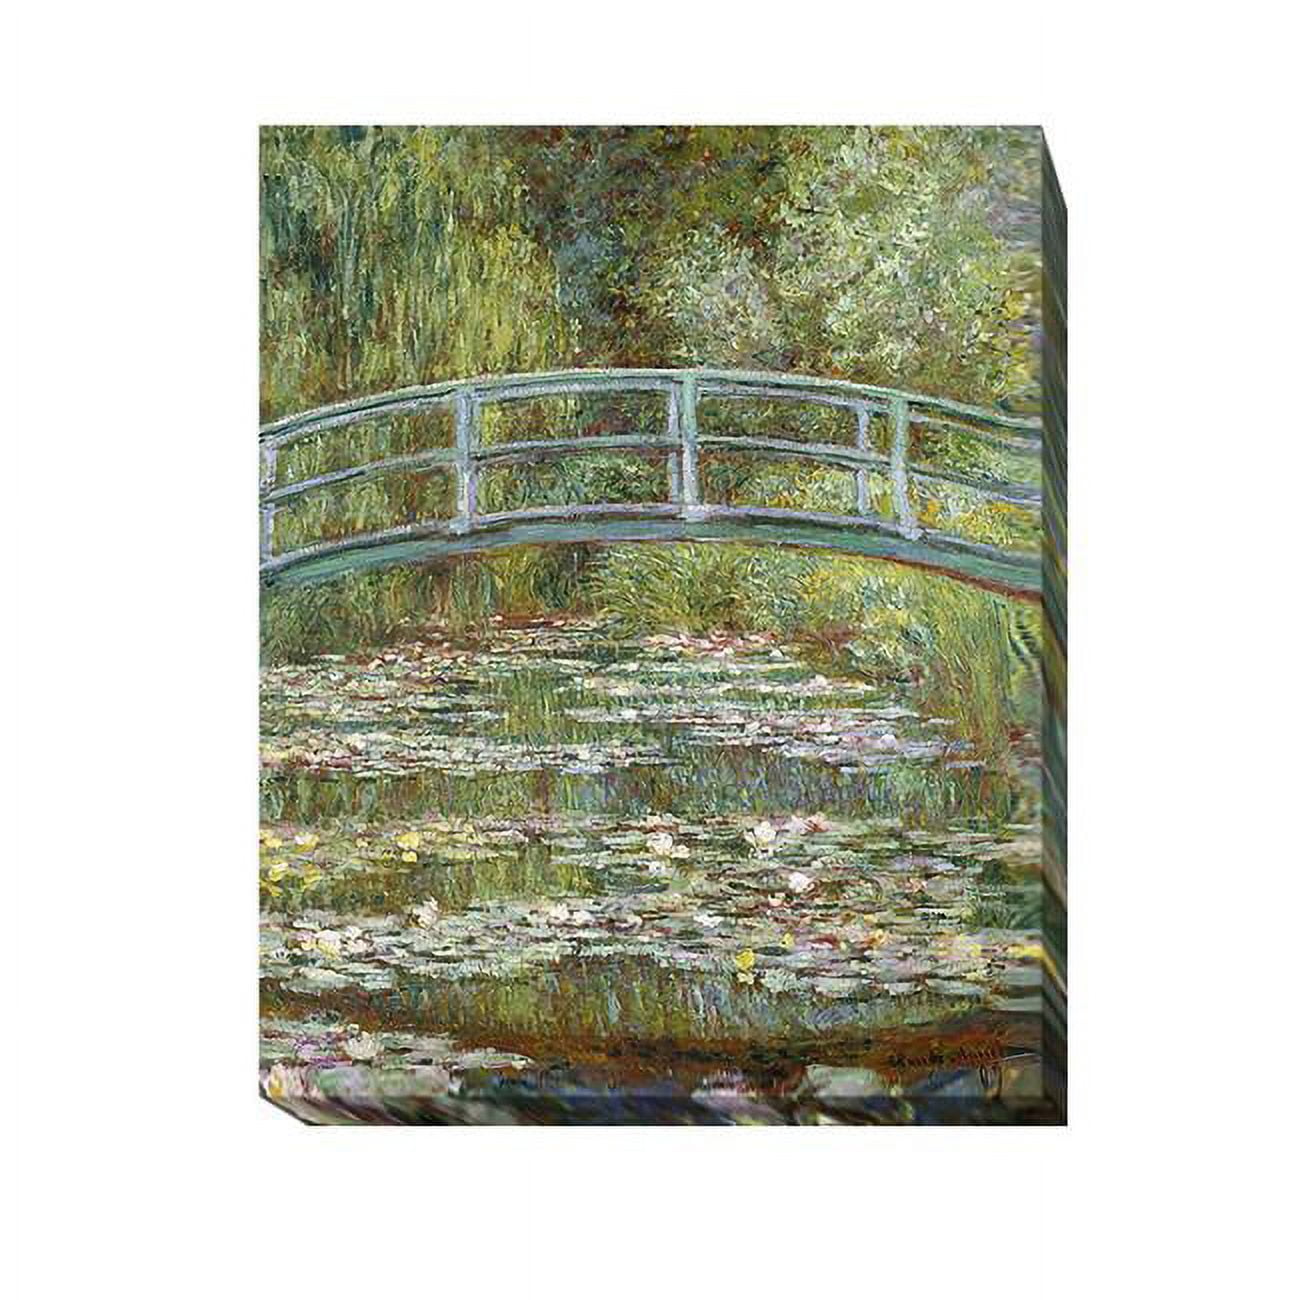 1620am799ig Pond Of Water Lilies By Claude Monet Premium Gallery-wrapped Canvas Giclee Art - Ready To Hang, 16 X 20 X 1.5 In.